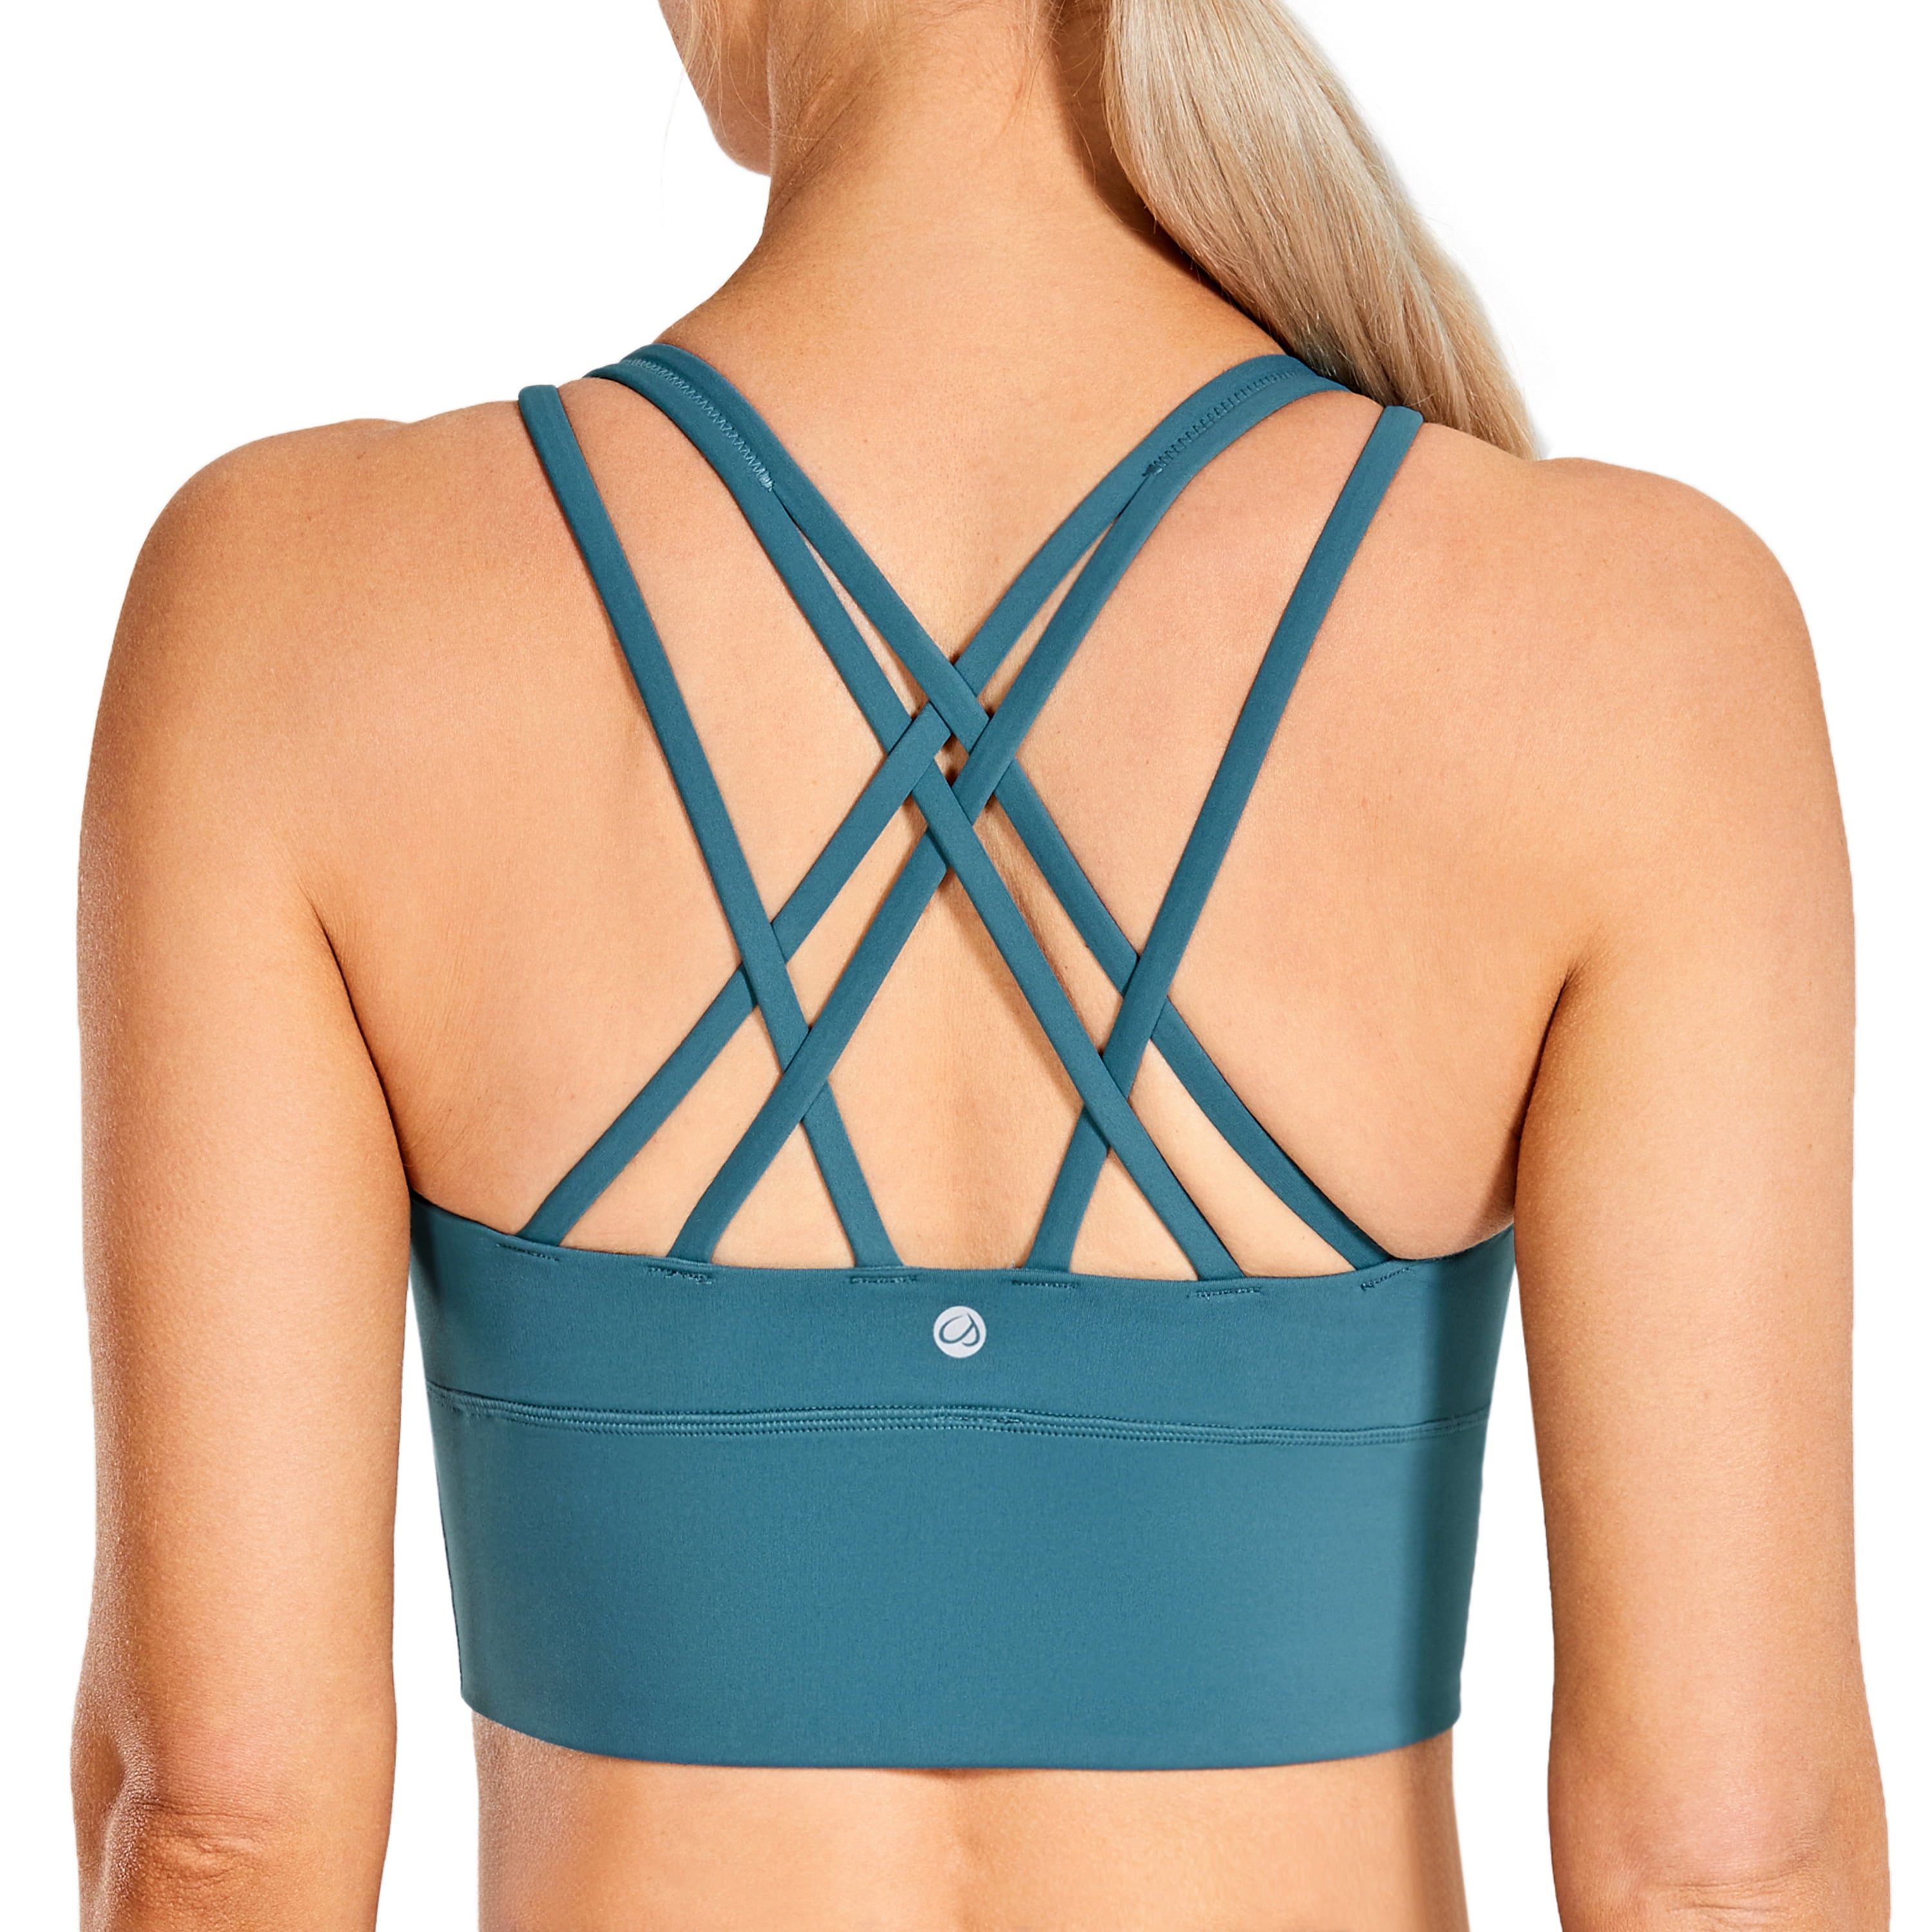 CRZ YOGA Padded Strappy Sports Bras for Women Workout Clothes Active Wear Yoga Bra Tops